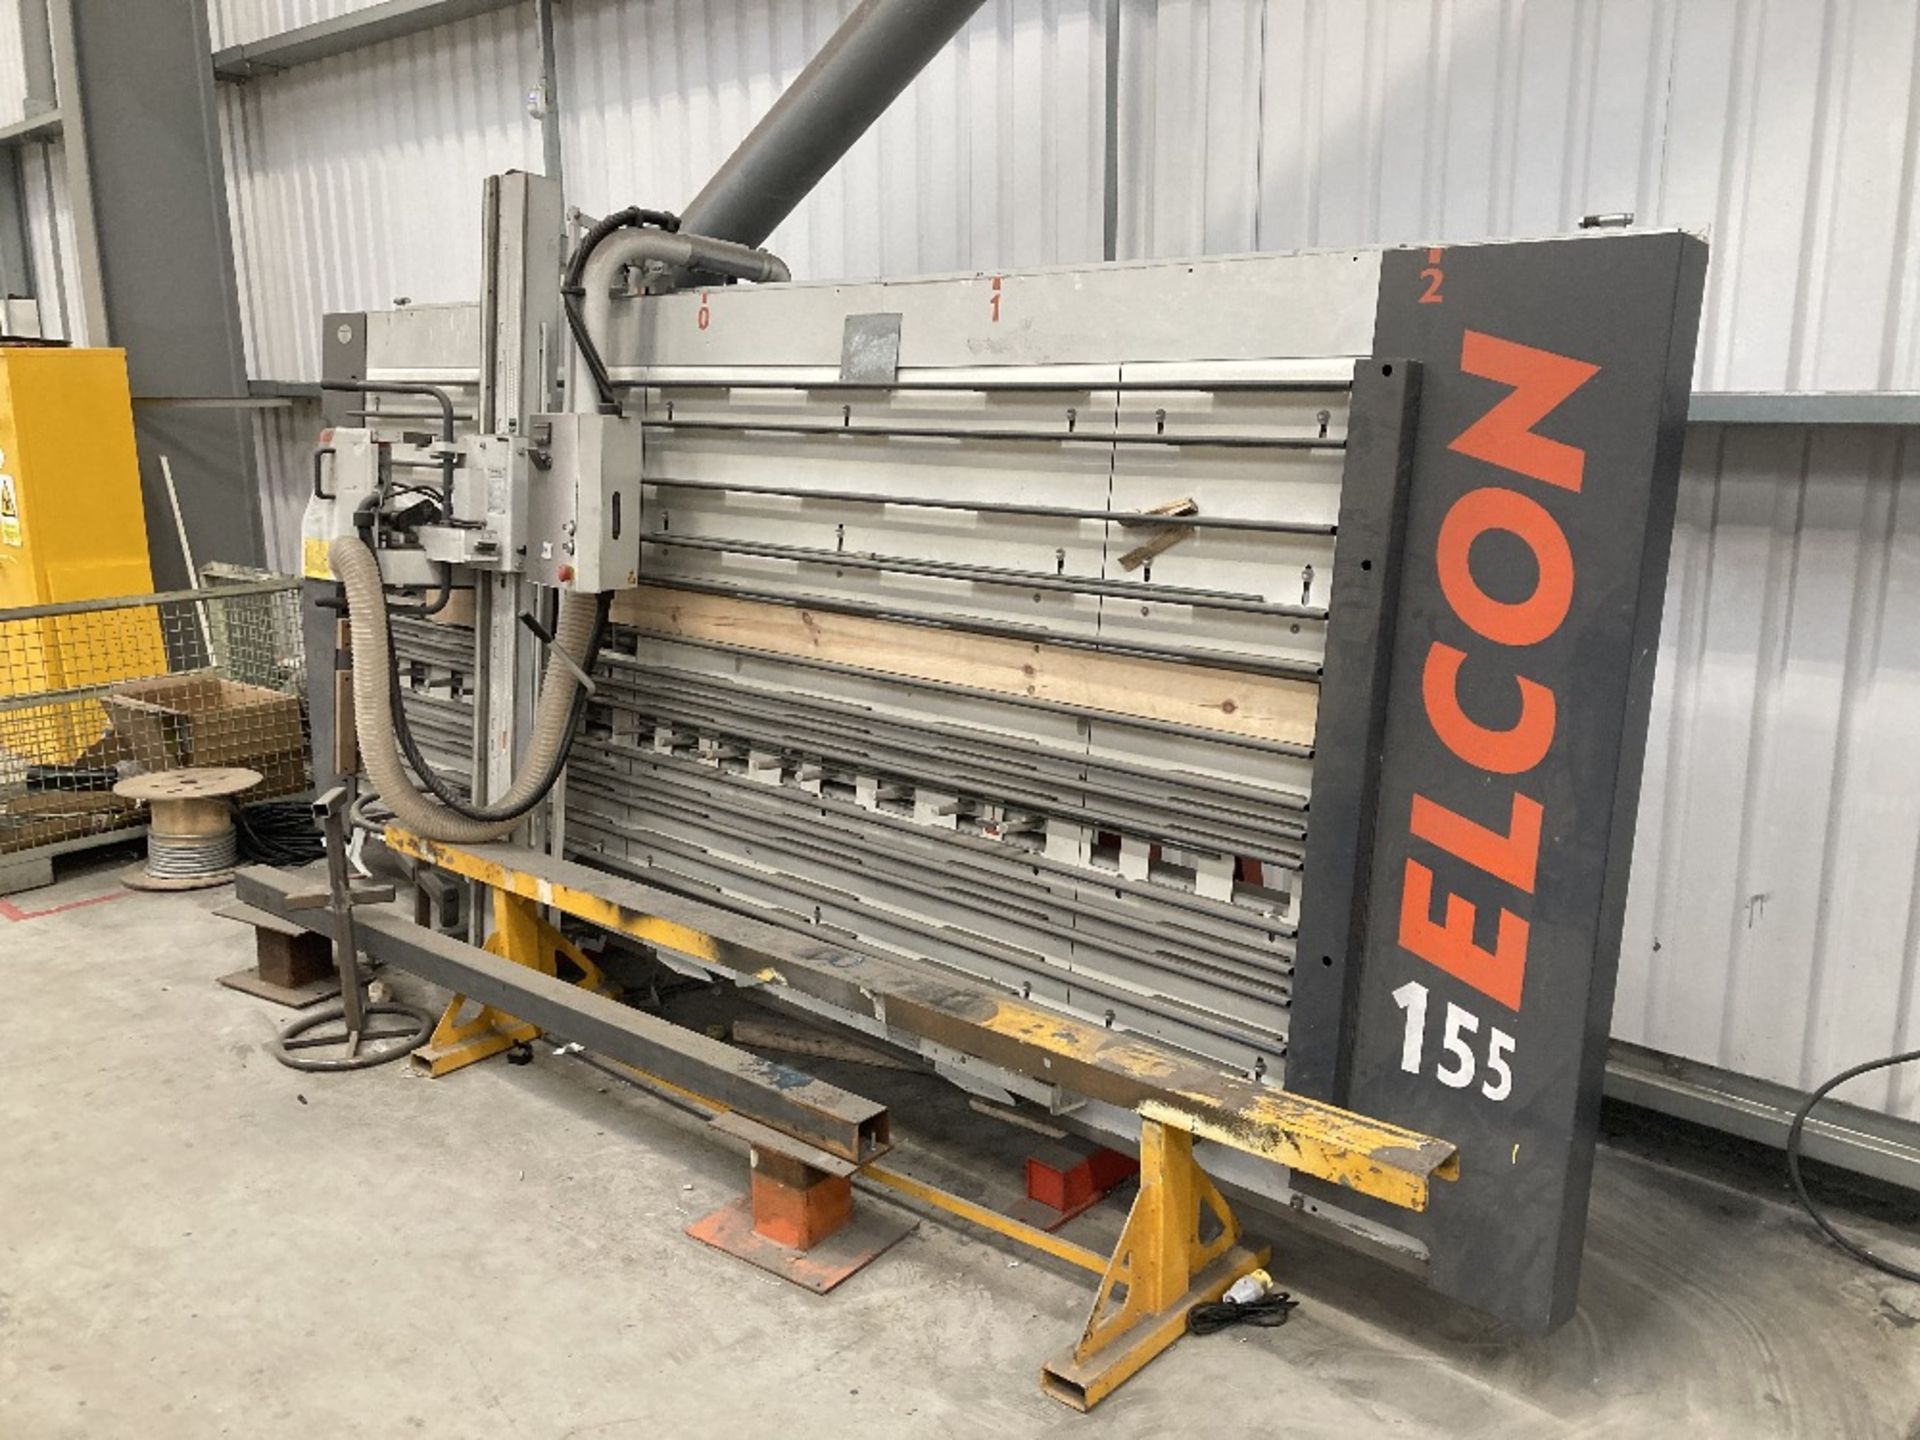 Elcon 155 DS Vertical Panel Saw & Fike Dust Extraction Unit - Image 5 of 15